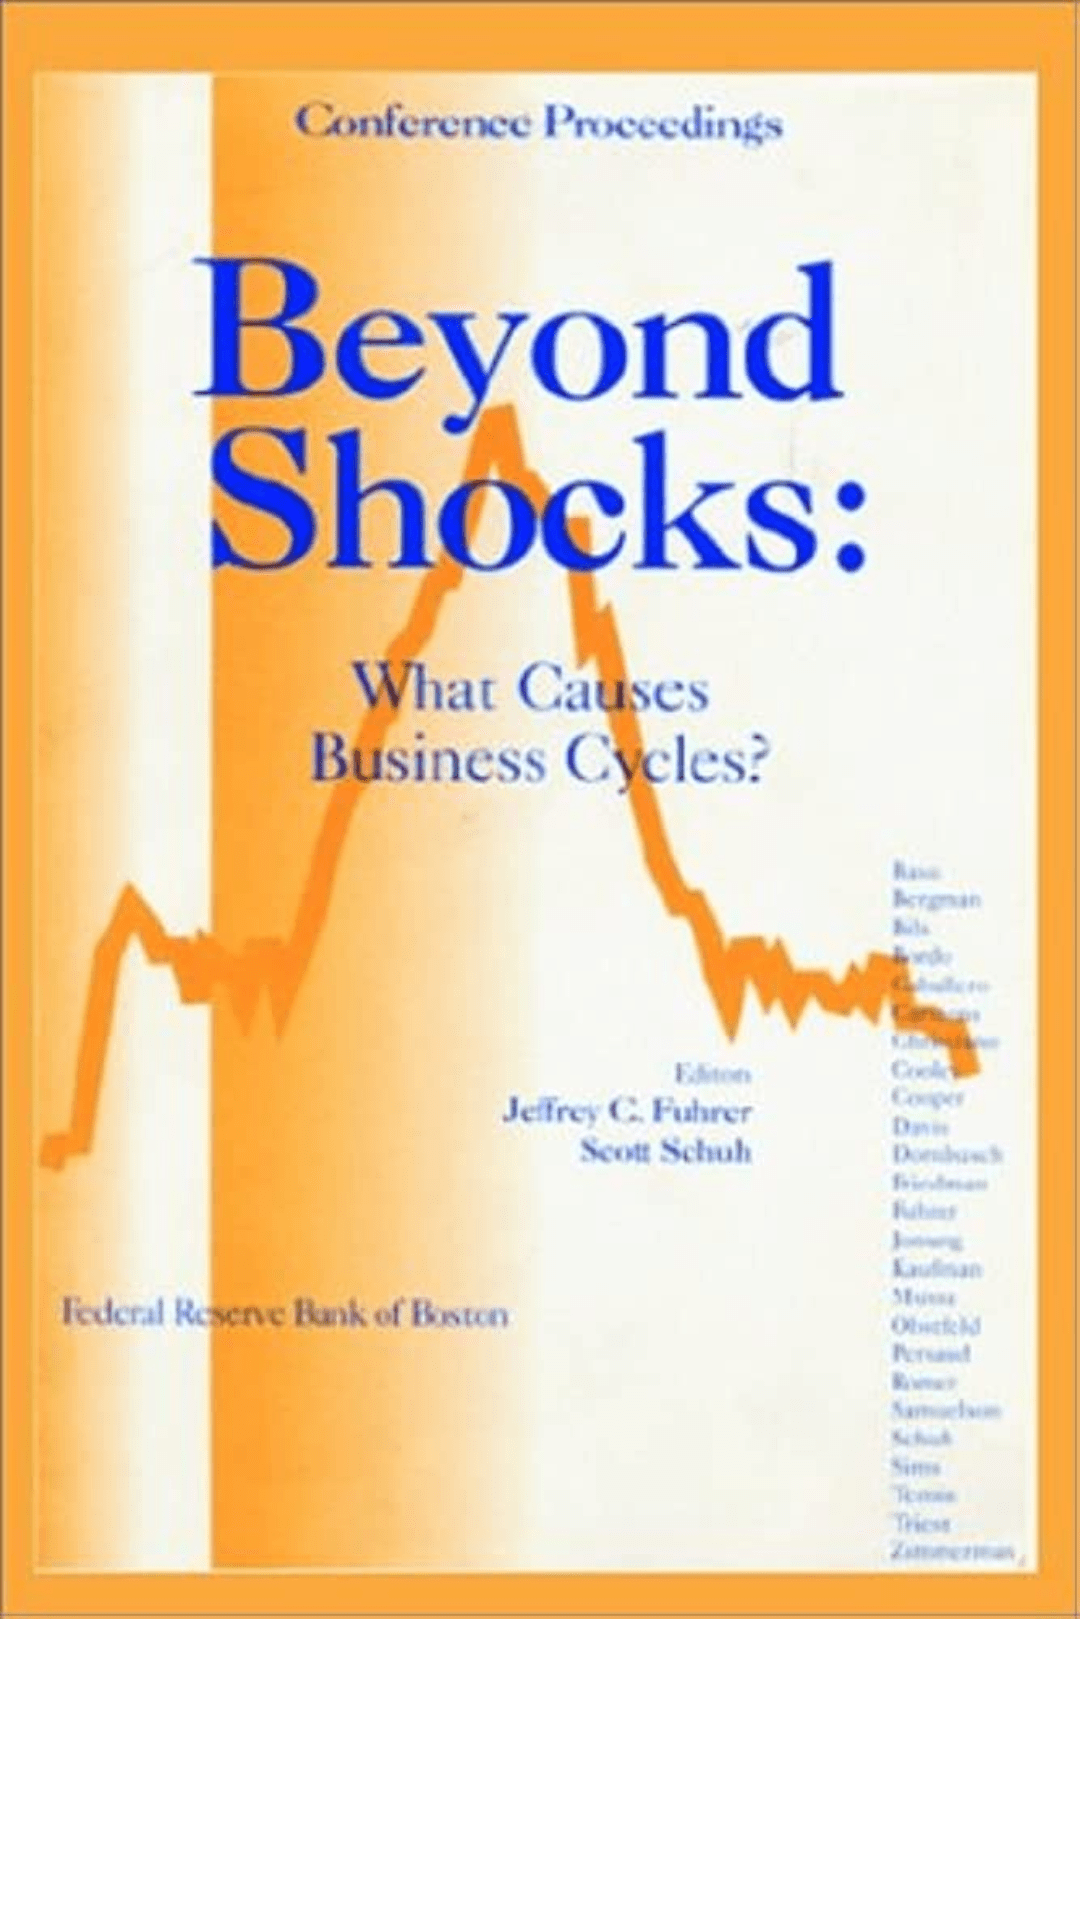 Beyond Shocks: What Causes Business Cycles?